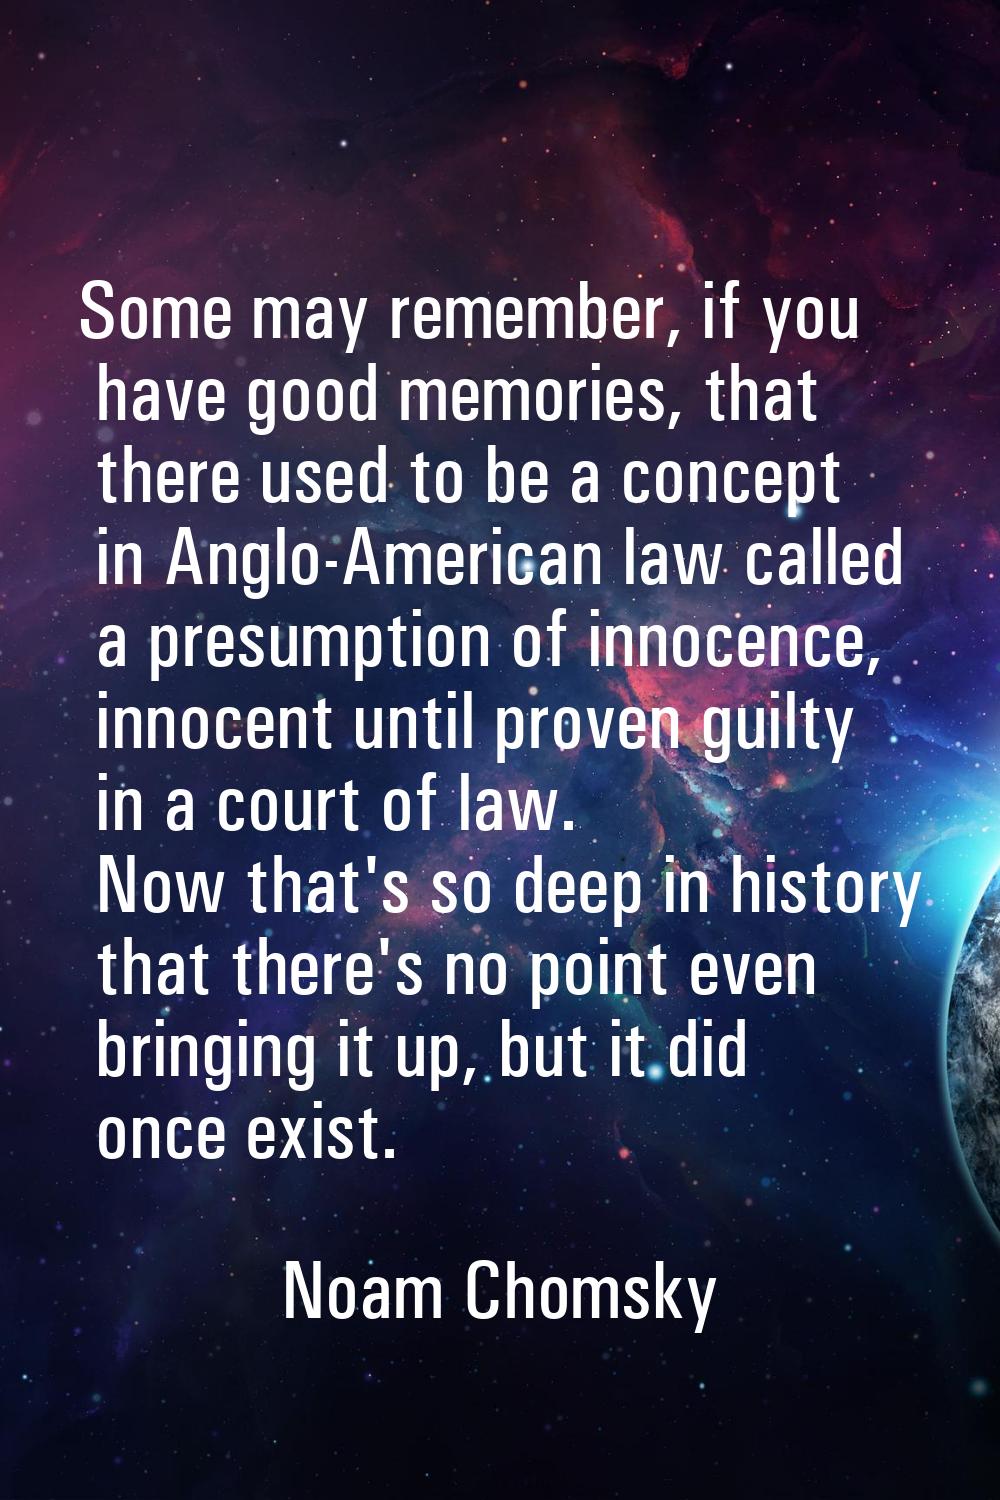 Some may remember, if you have good memories, that there used to be a concept in Anglo-American law